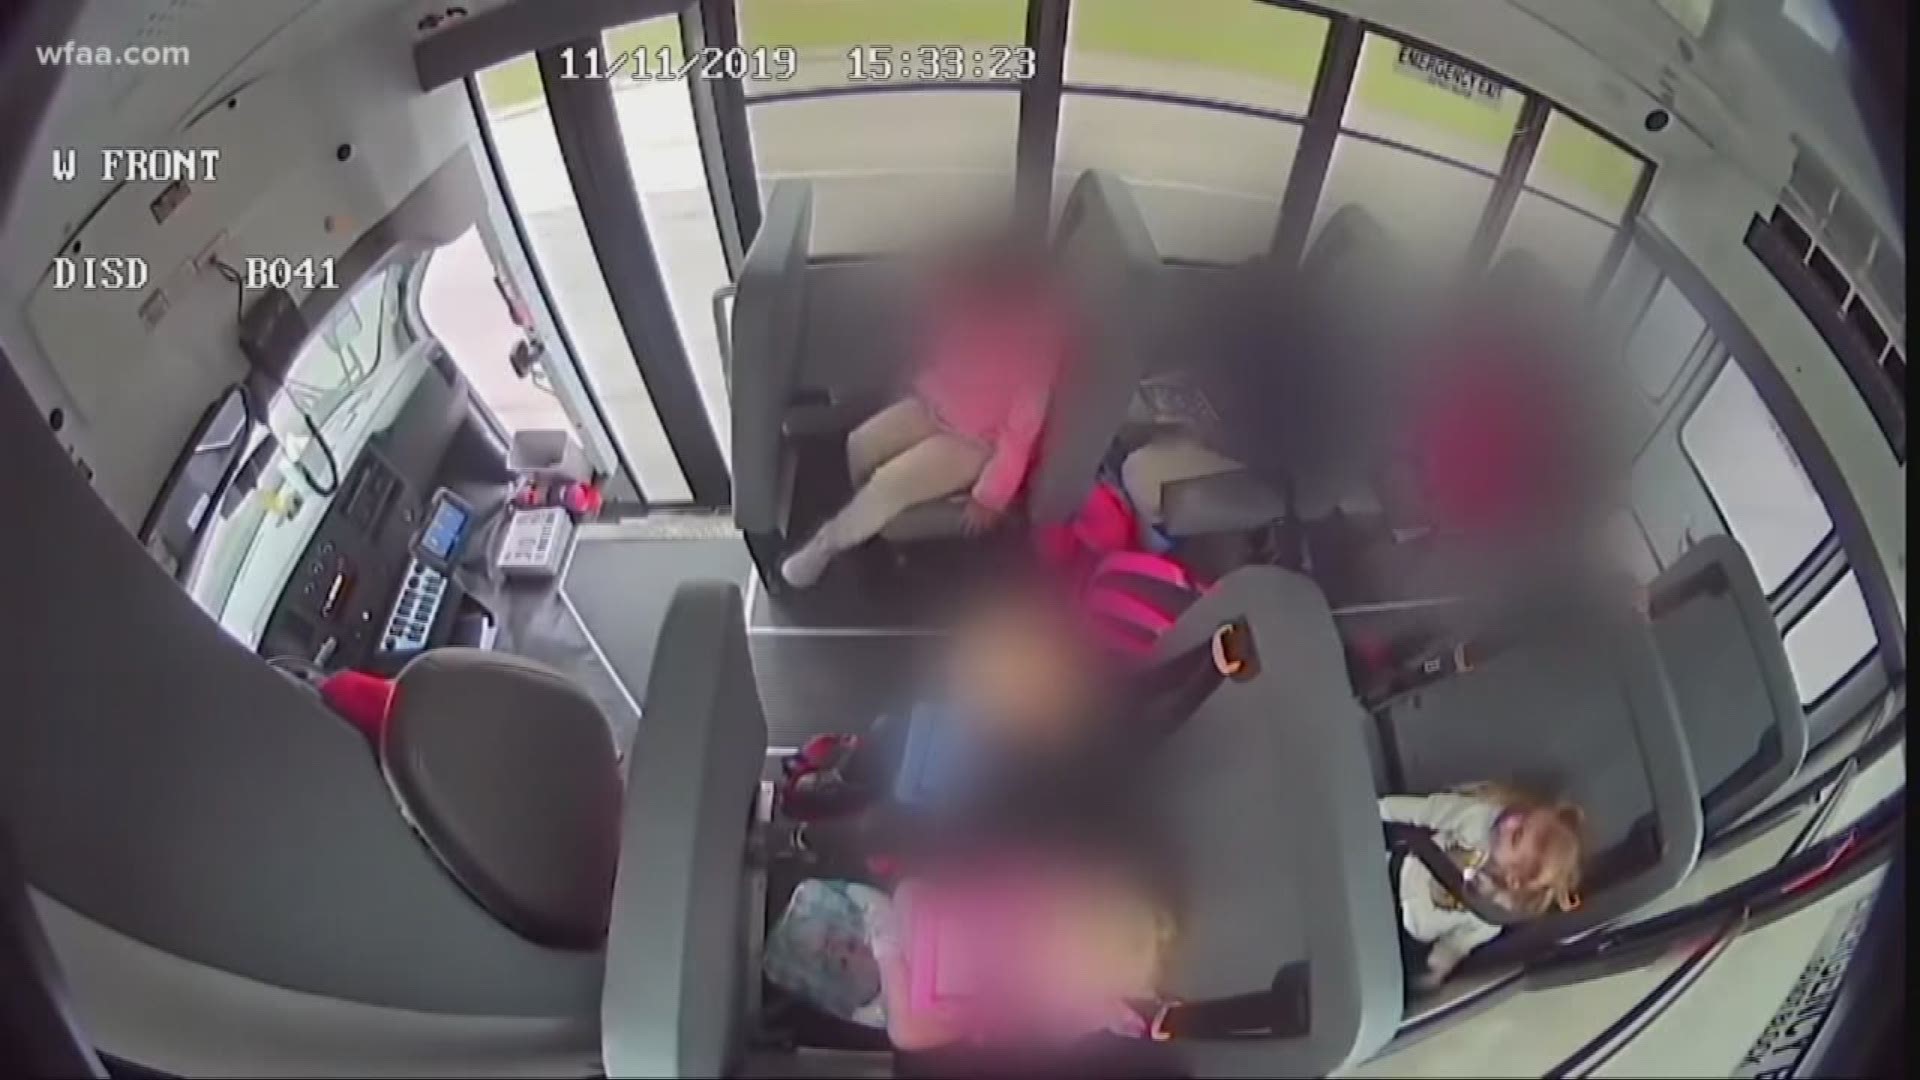 A video shows a 5-year-old girl trying to defend herself as older children attack her on the school bus. The mother says her daughter no longer takes the bus.